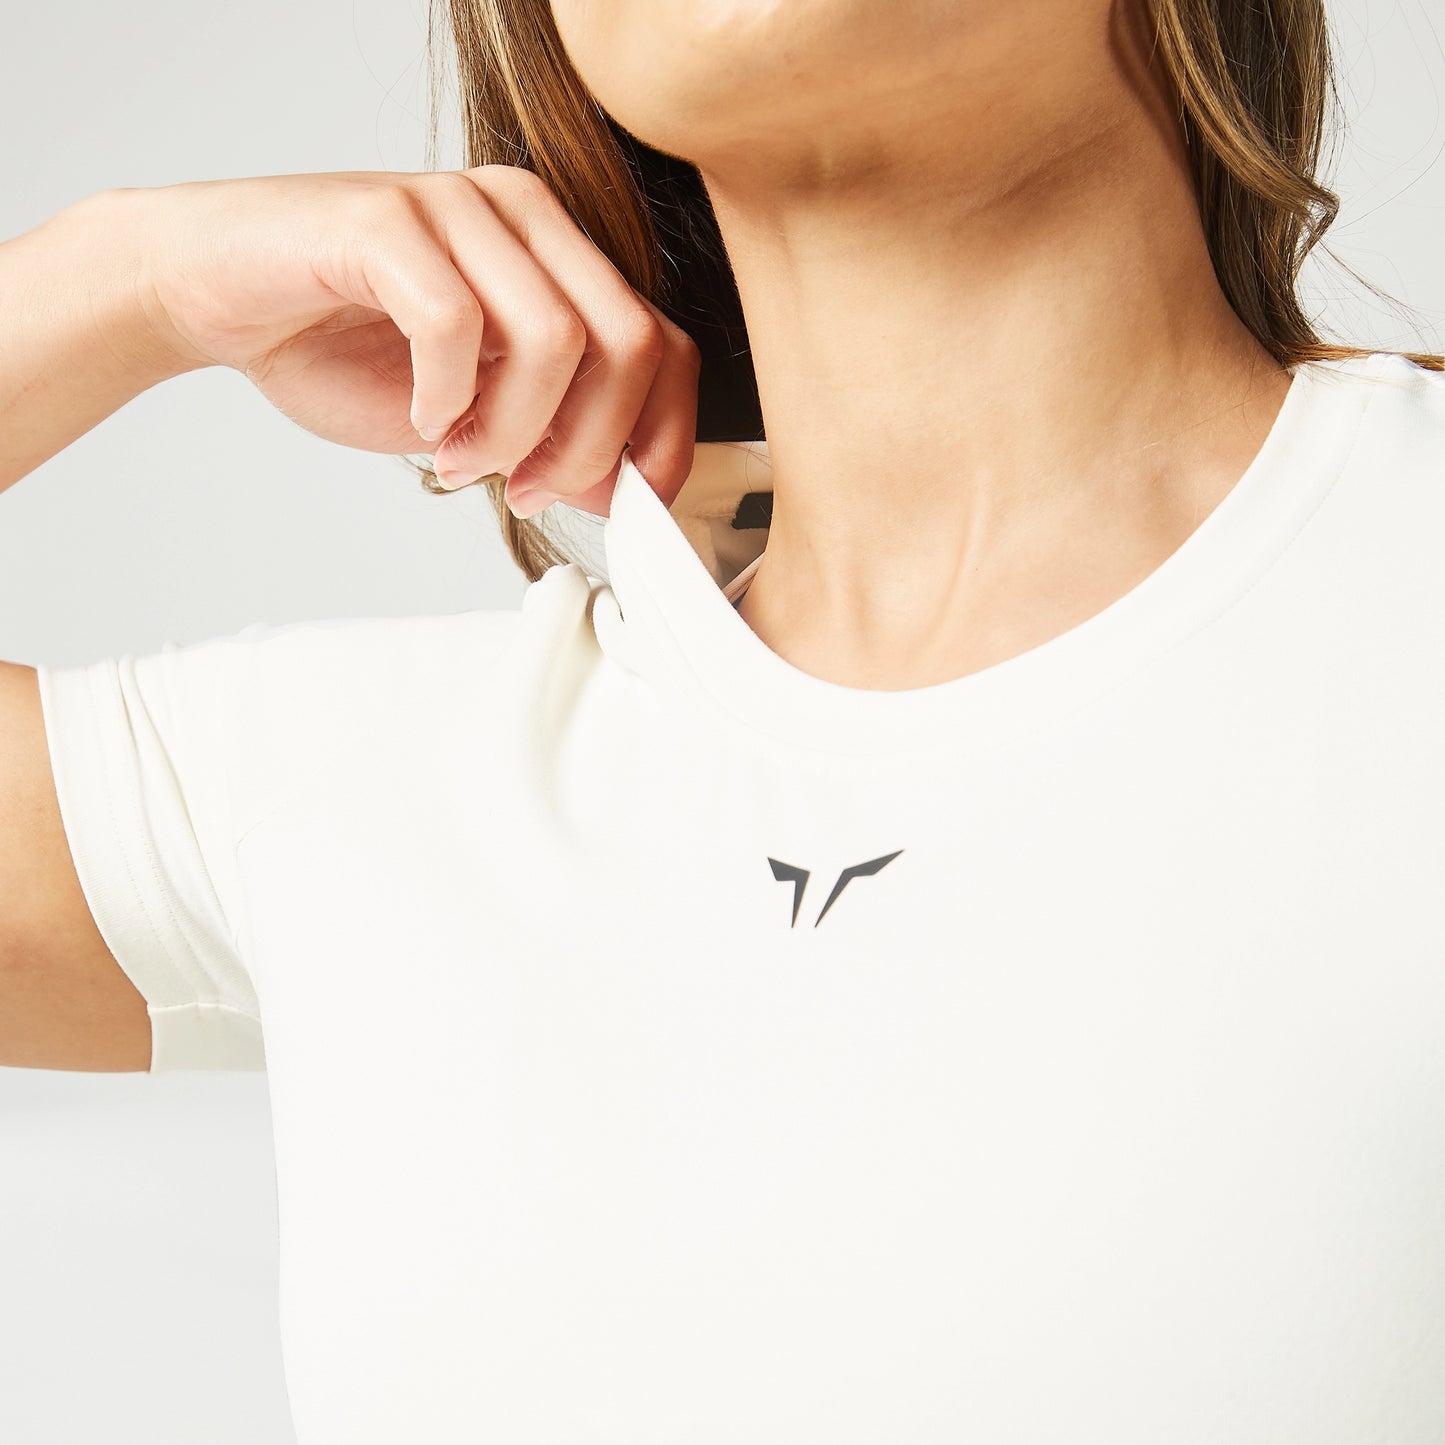 Essential Cropped Tee - Pearl White